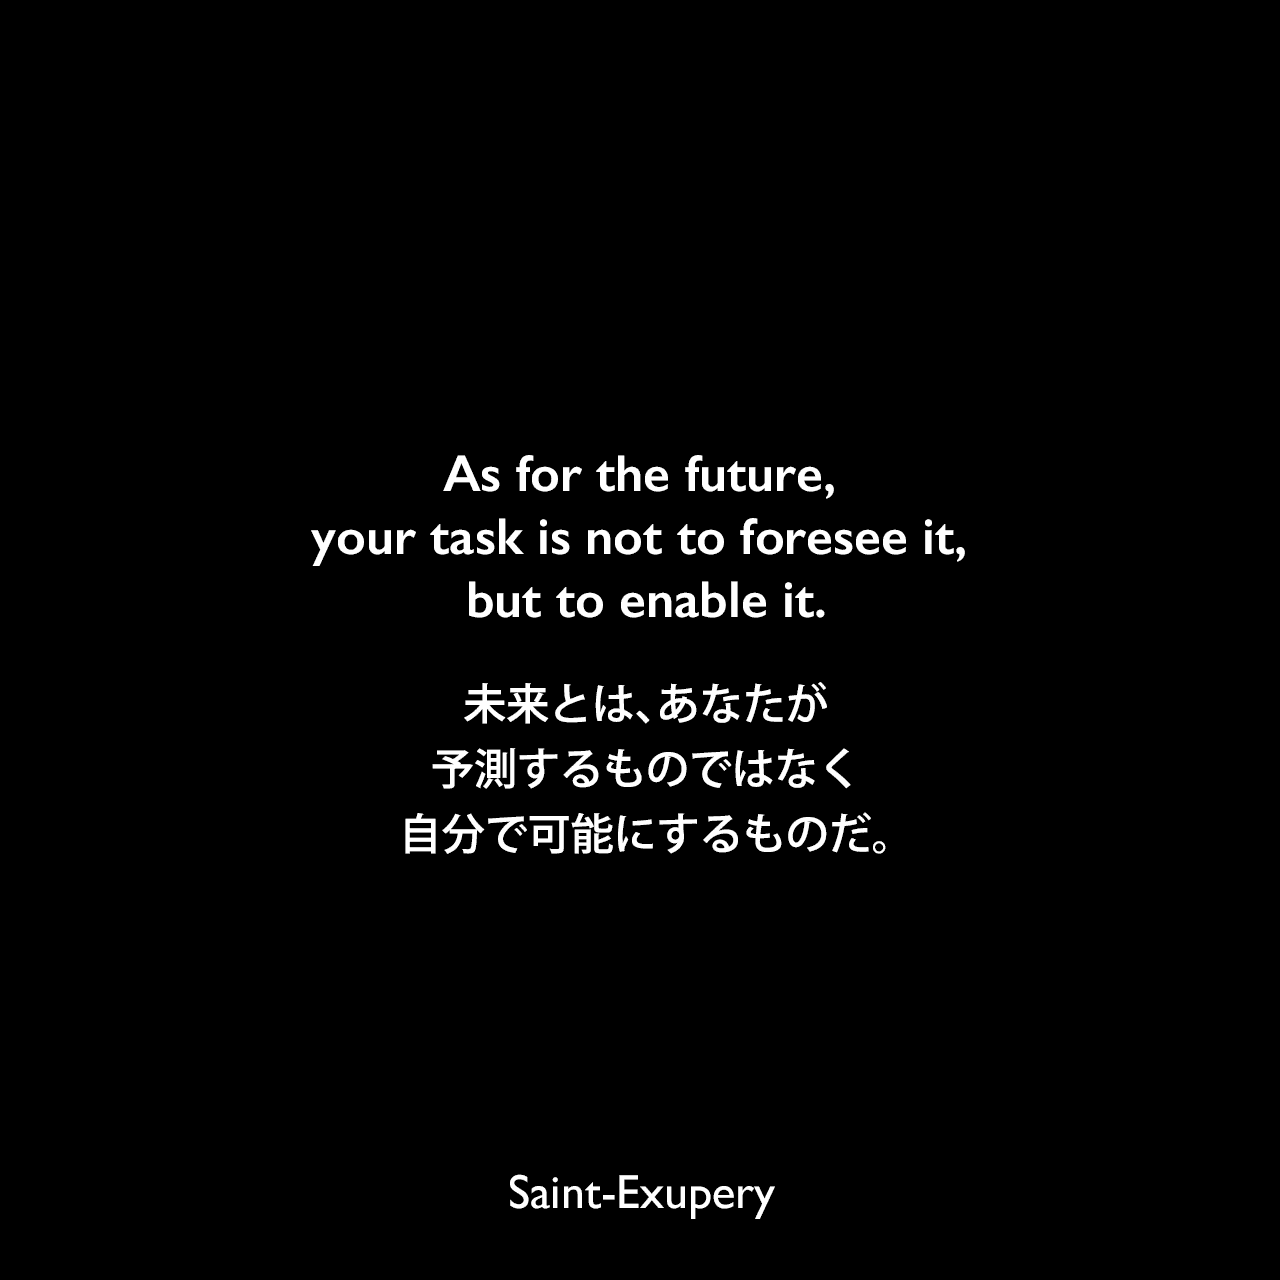 As for the future, your task is not to foresee it, but to enable it.未来とは、あなたが予測するものではなく、自分で可能にするものだ。